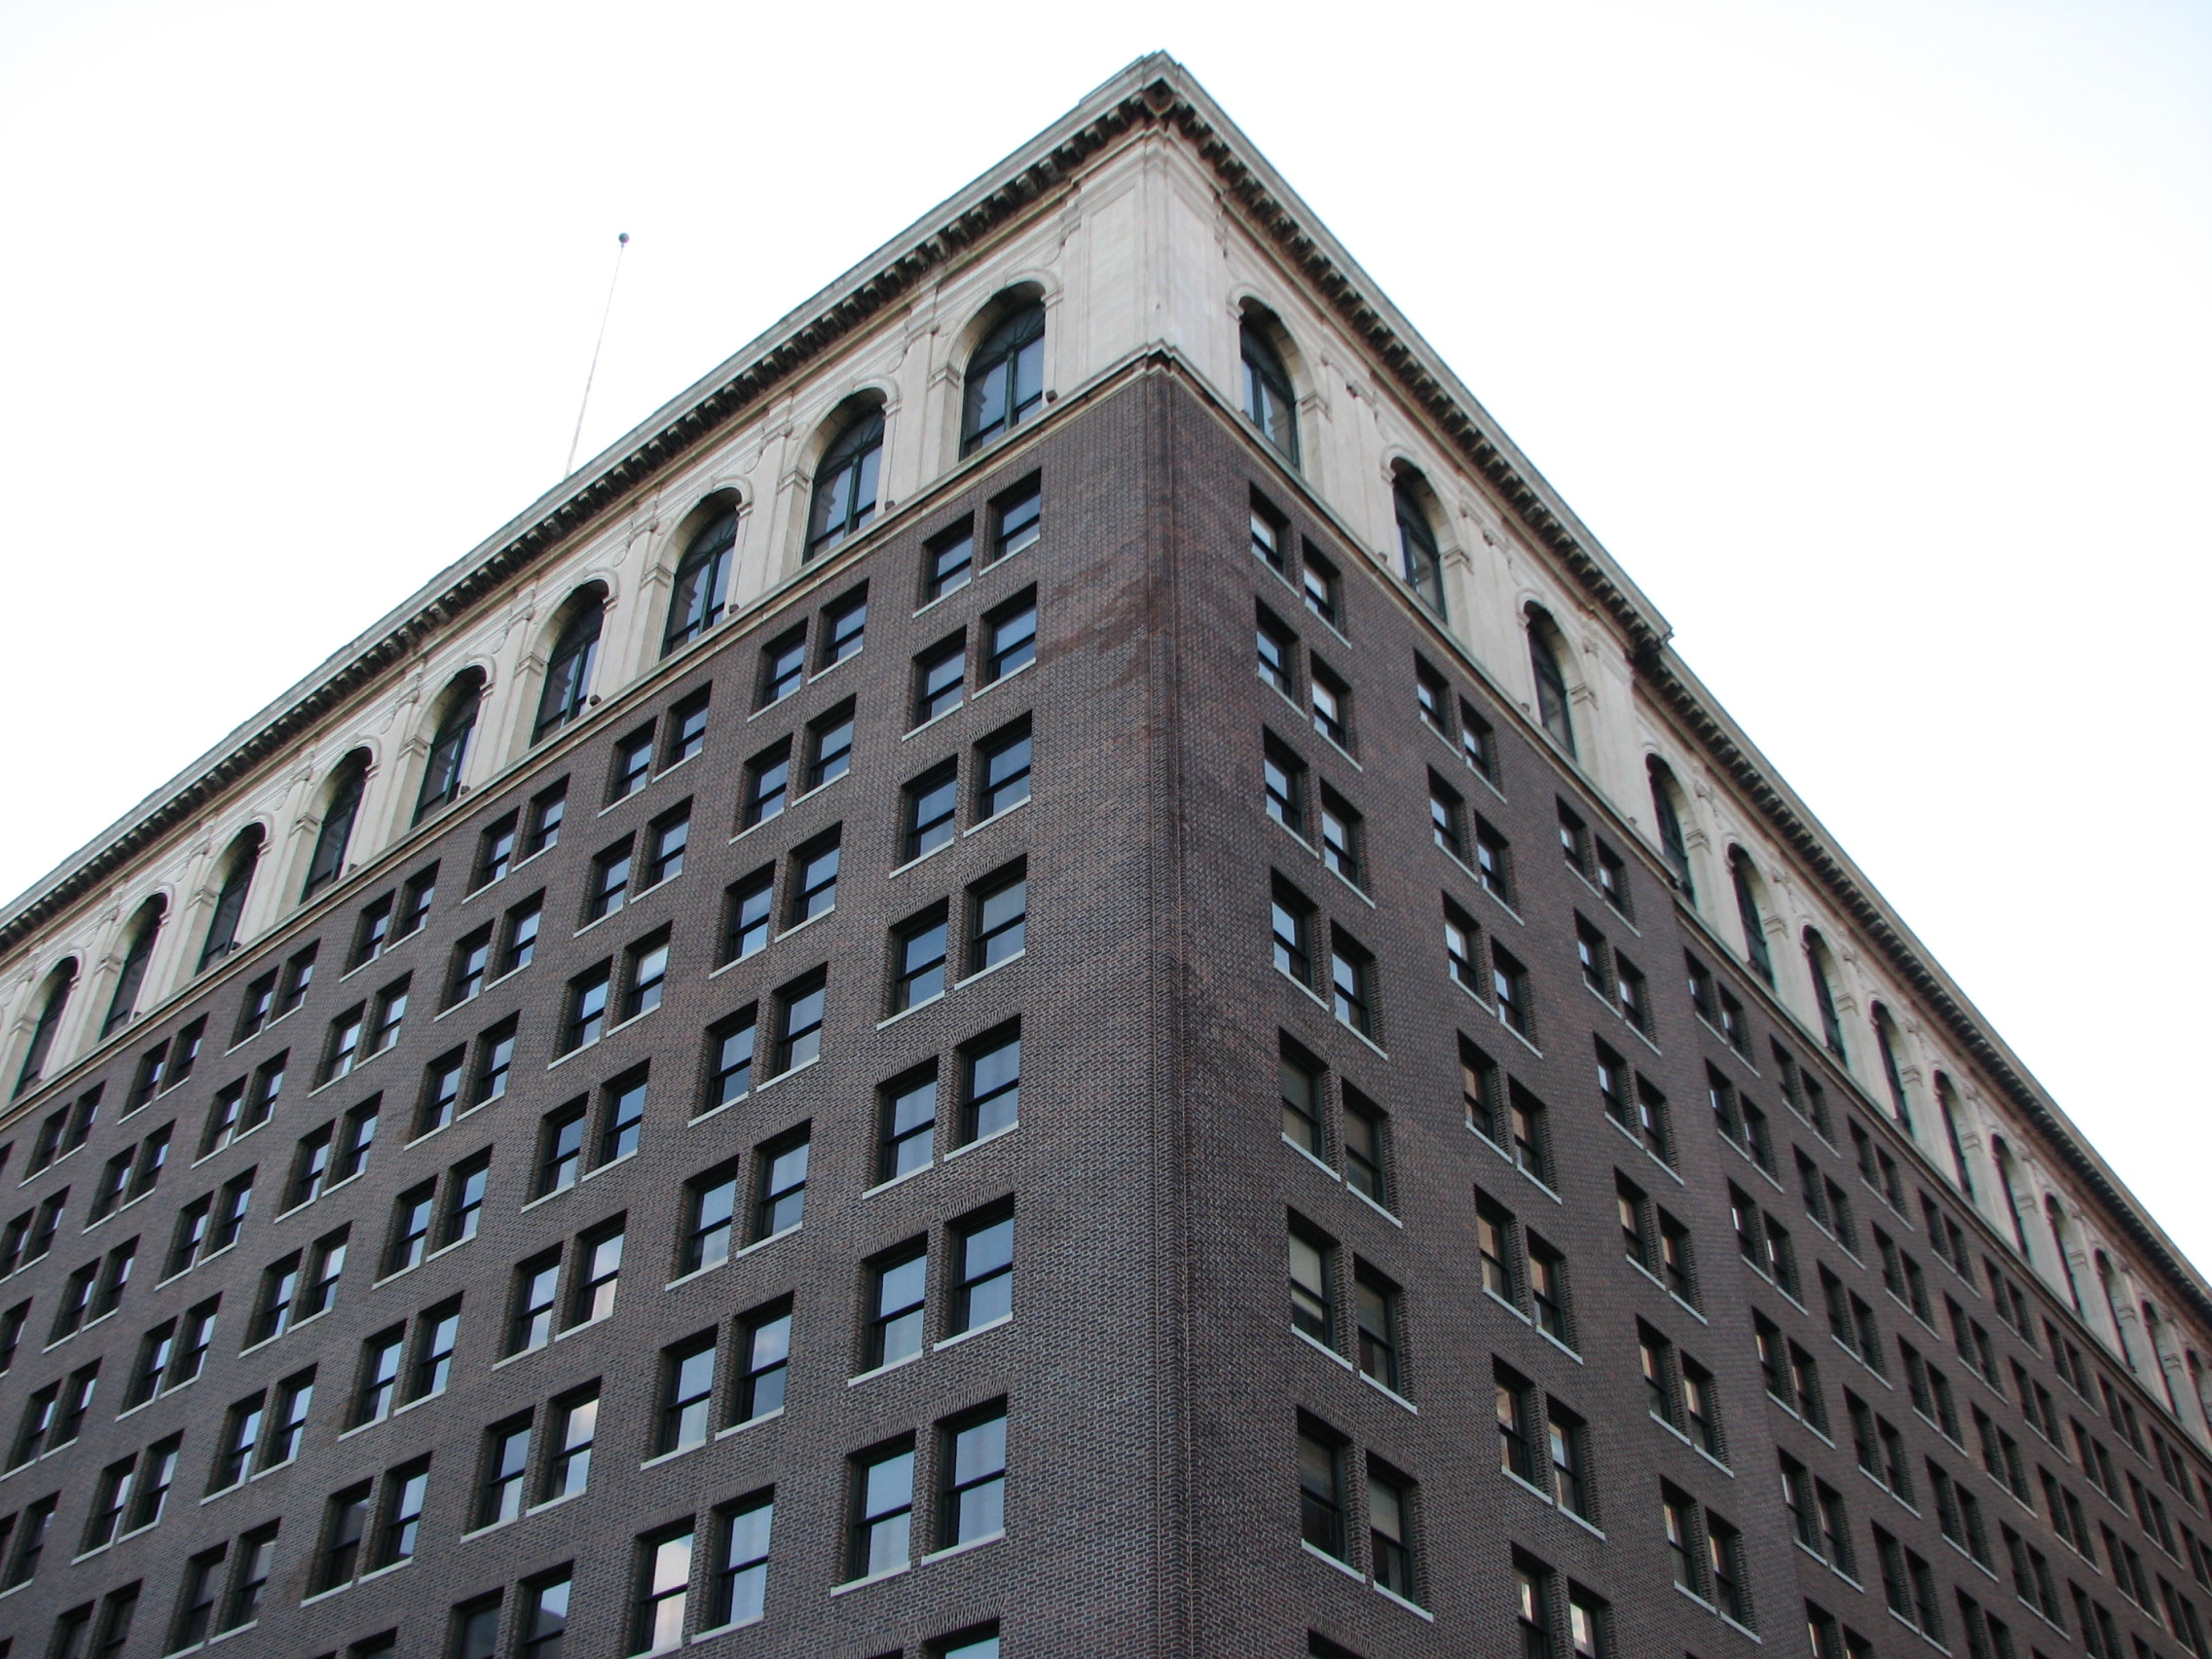 The brick midsection of the building reflects its utilitarian role, but Trumbauer topped the building with a row of white marble arches.